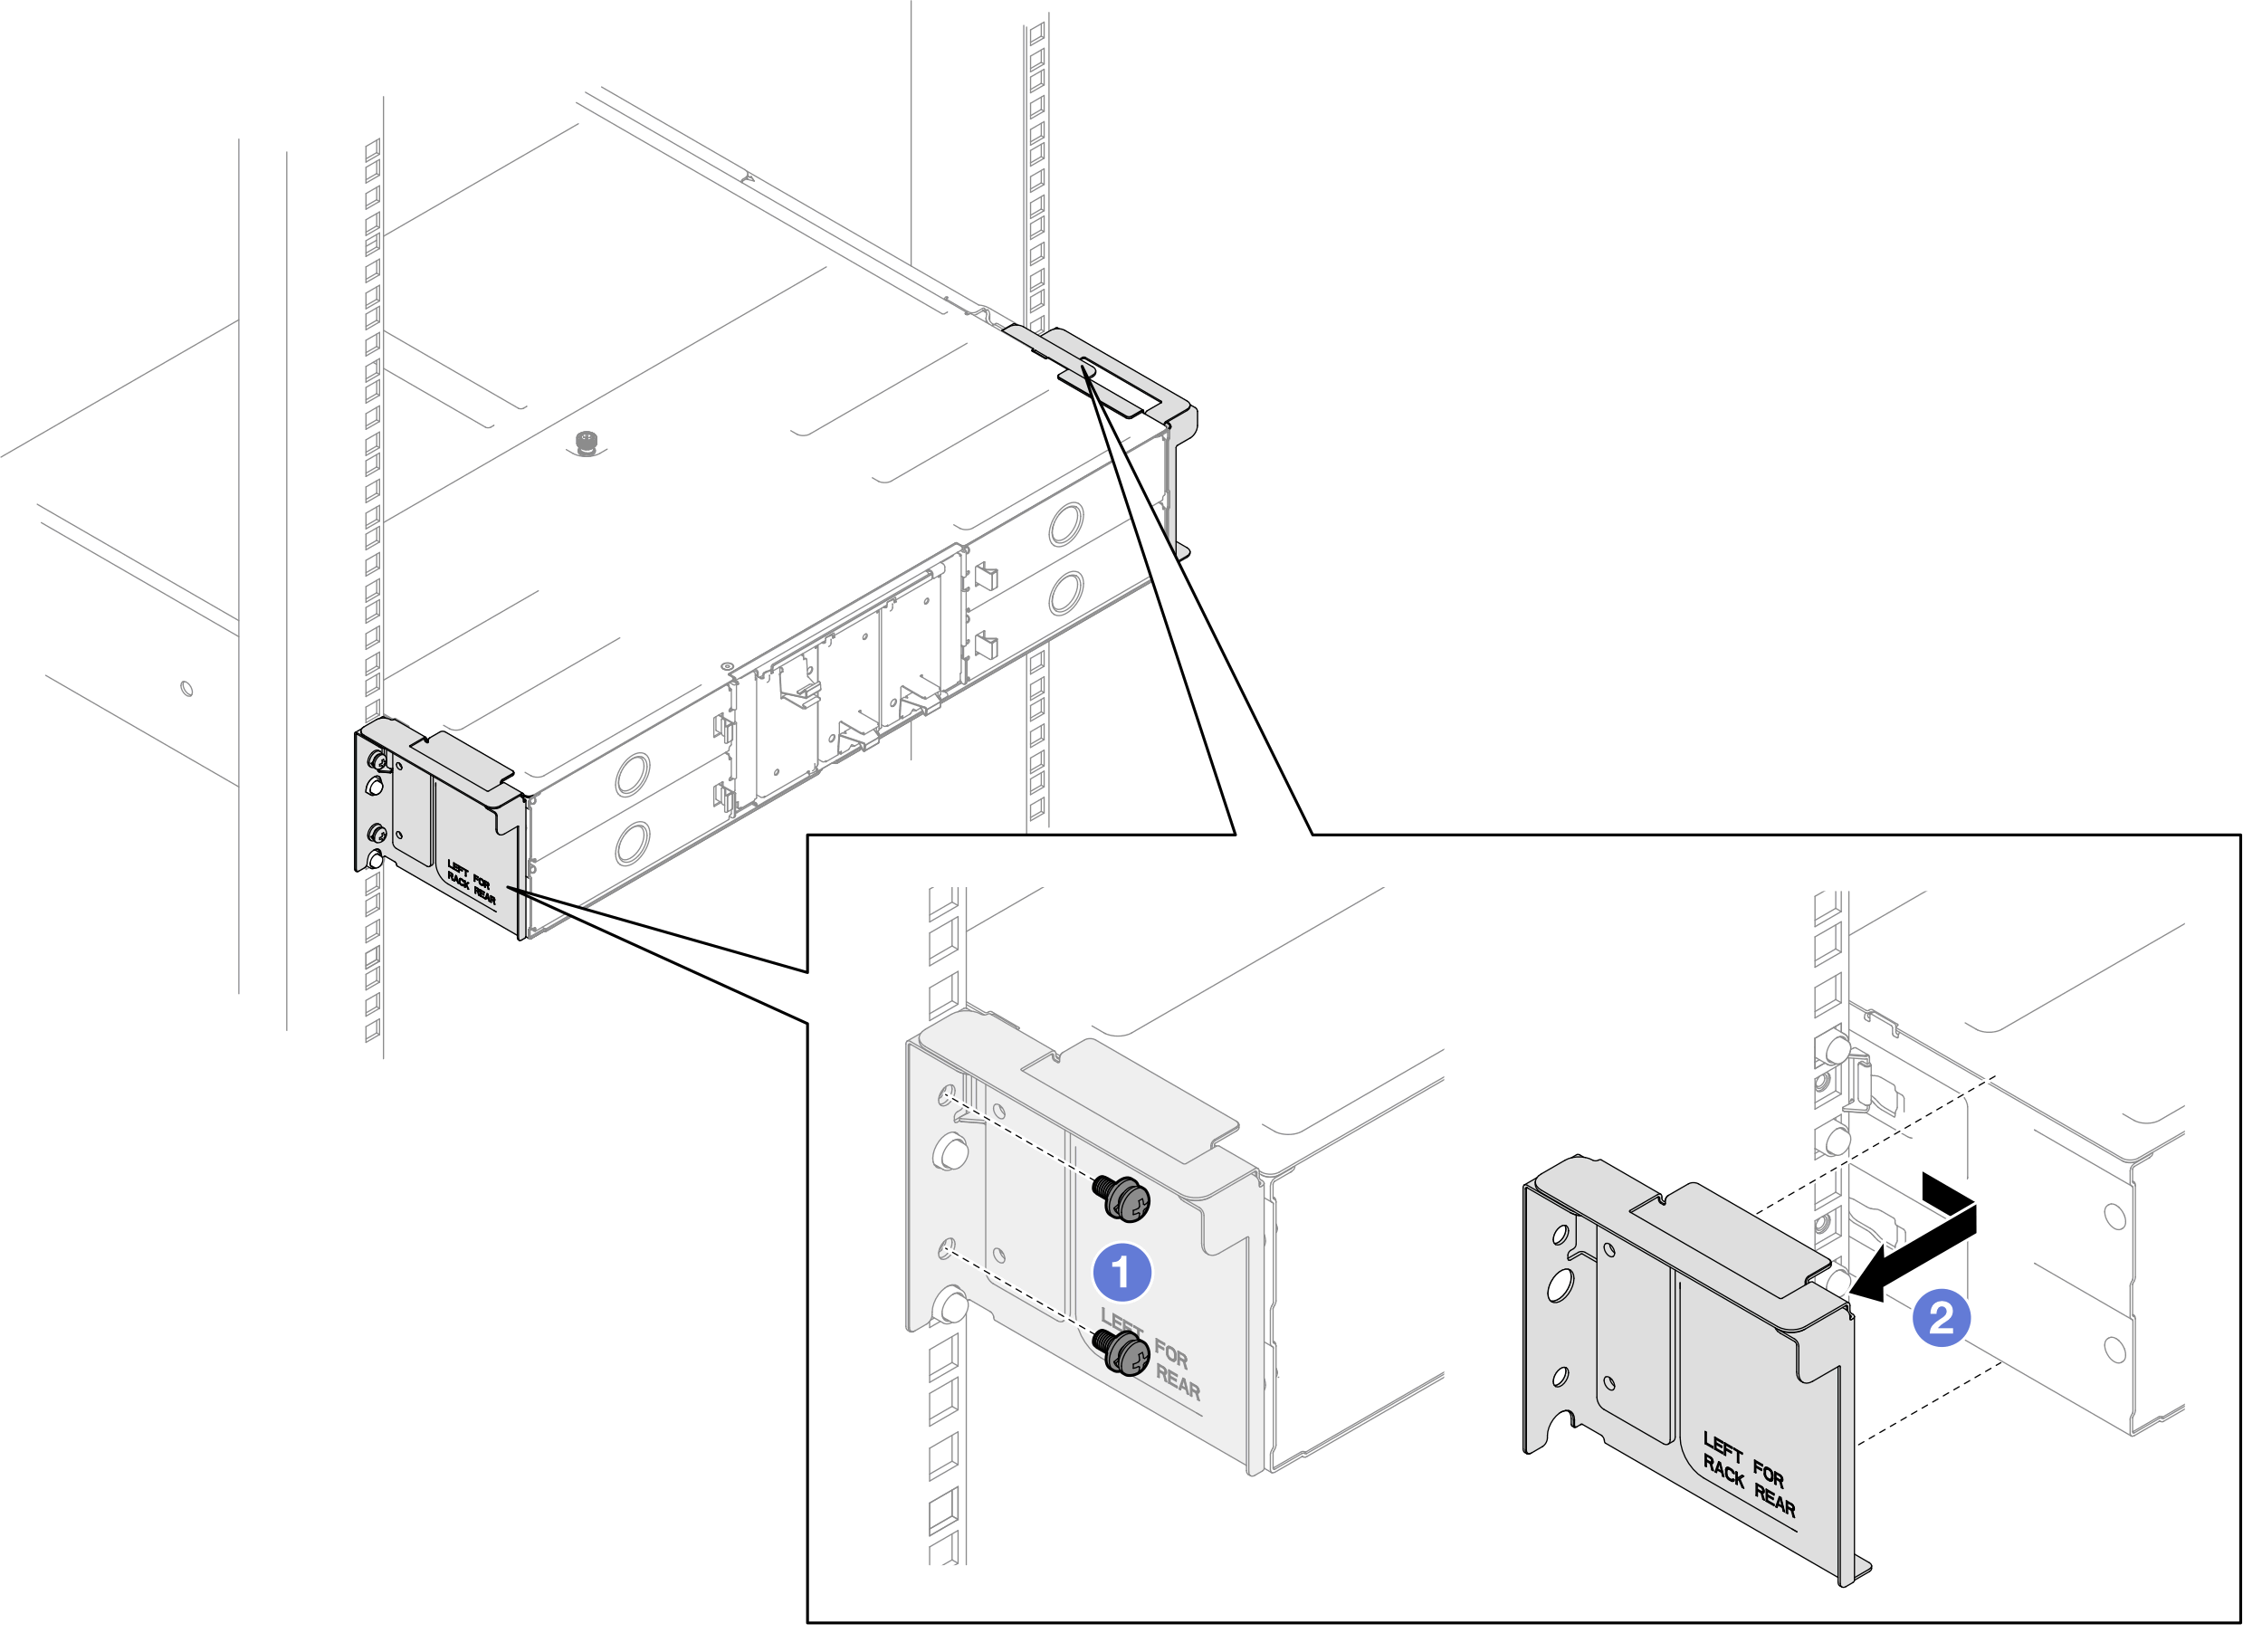 Removal of shipping brackets for 29.5-inch deep racks